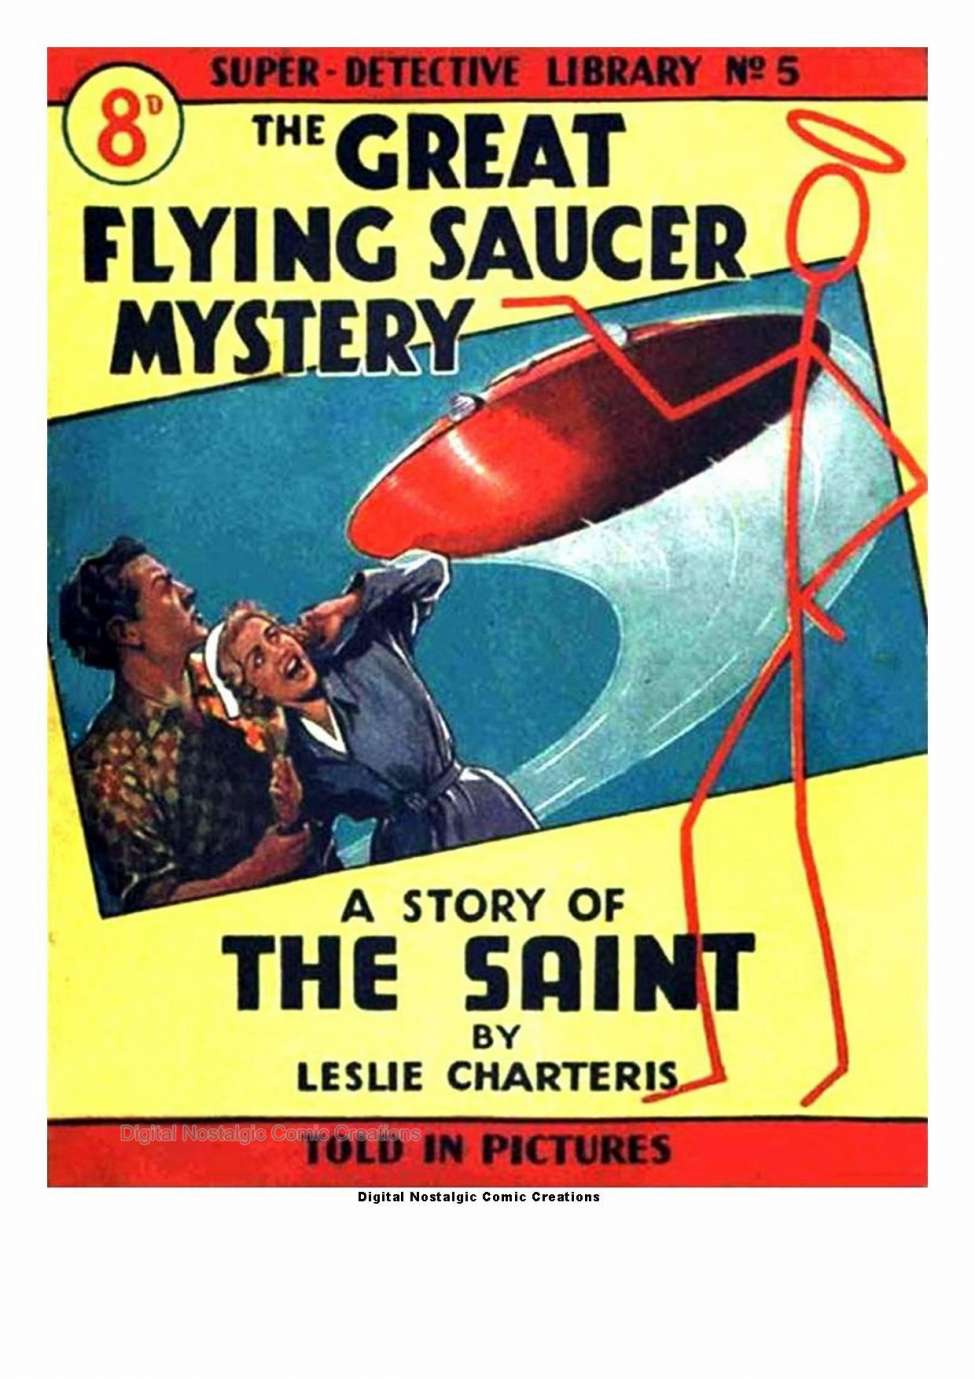 Comic Book Cover For Super Detective Library 5 - The Great Flying Saucer Mystery